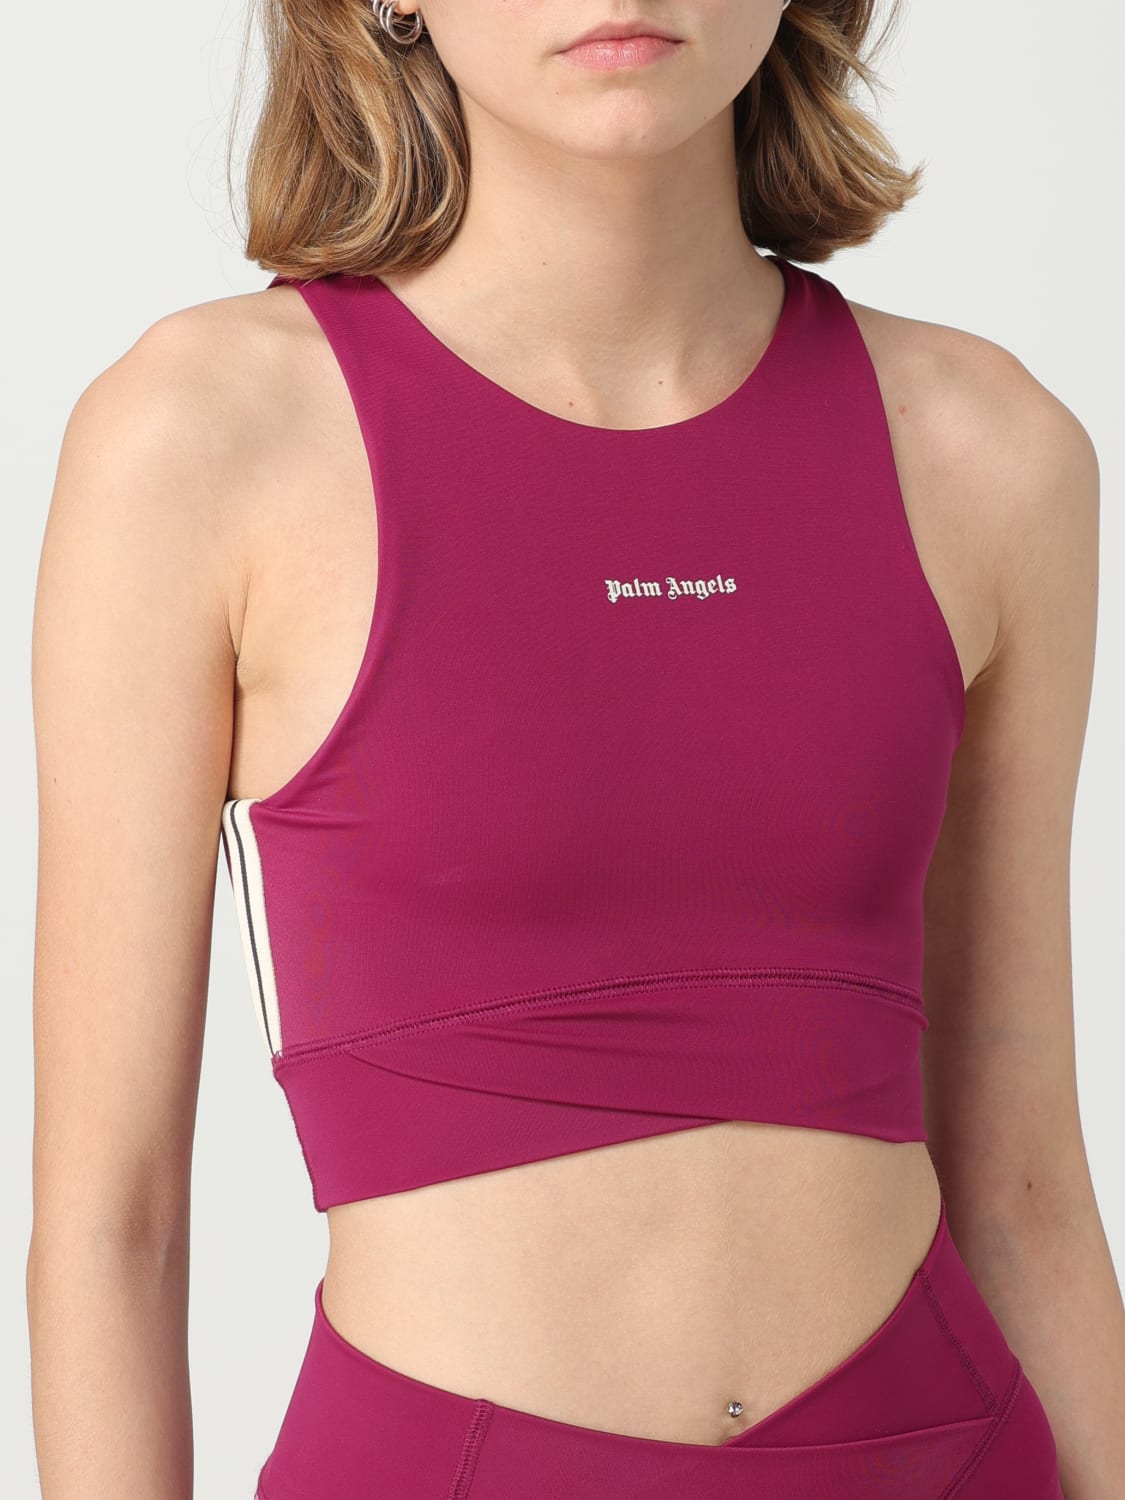 PALM ANGELS: top for women - Fuchsia  Palm Angels top PWVO039F23FAB001  online at